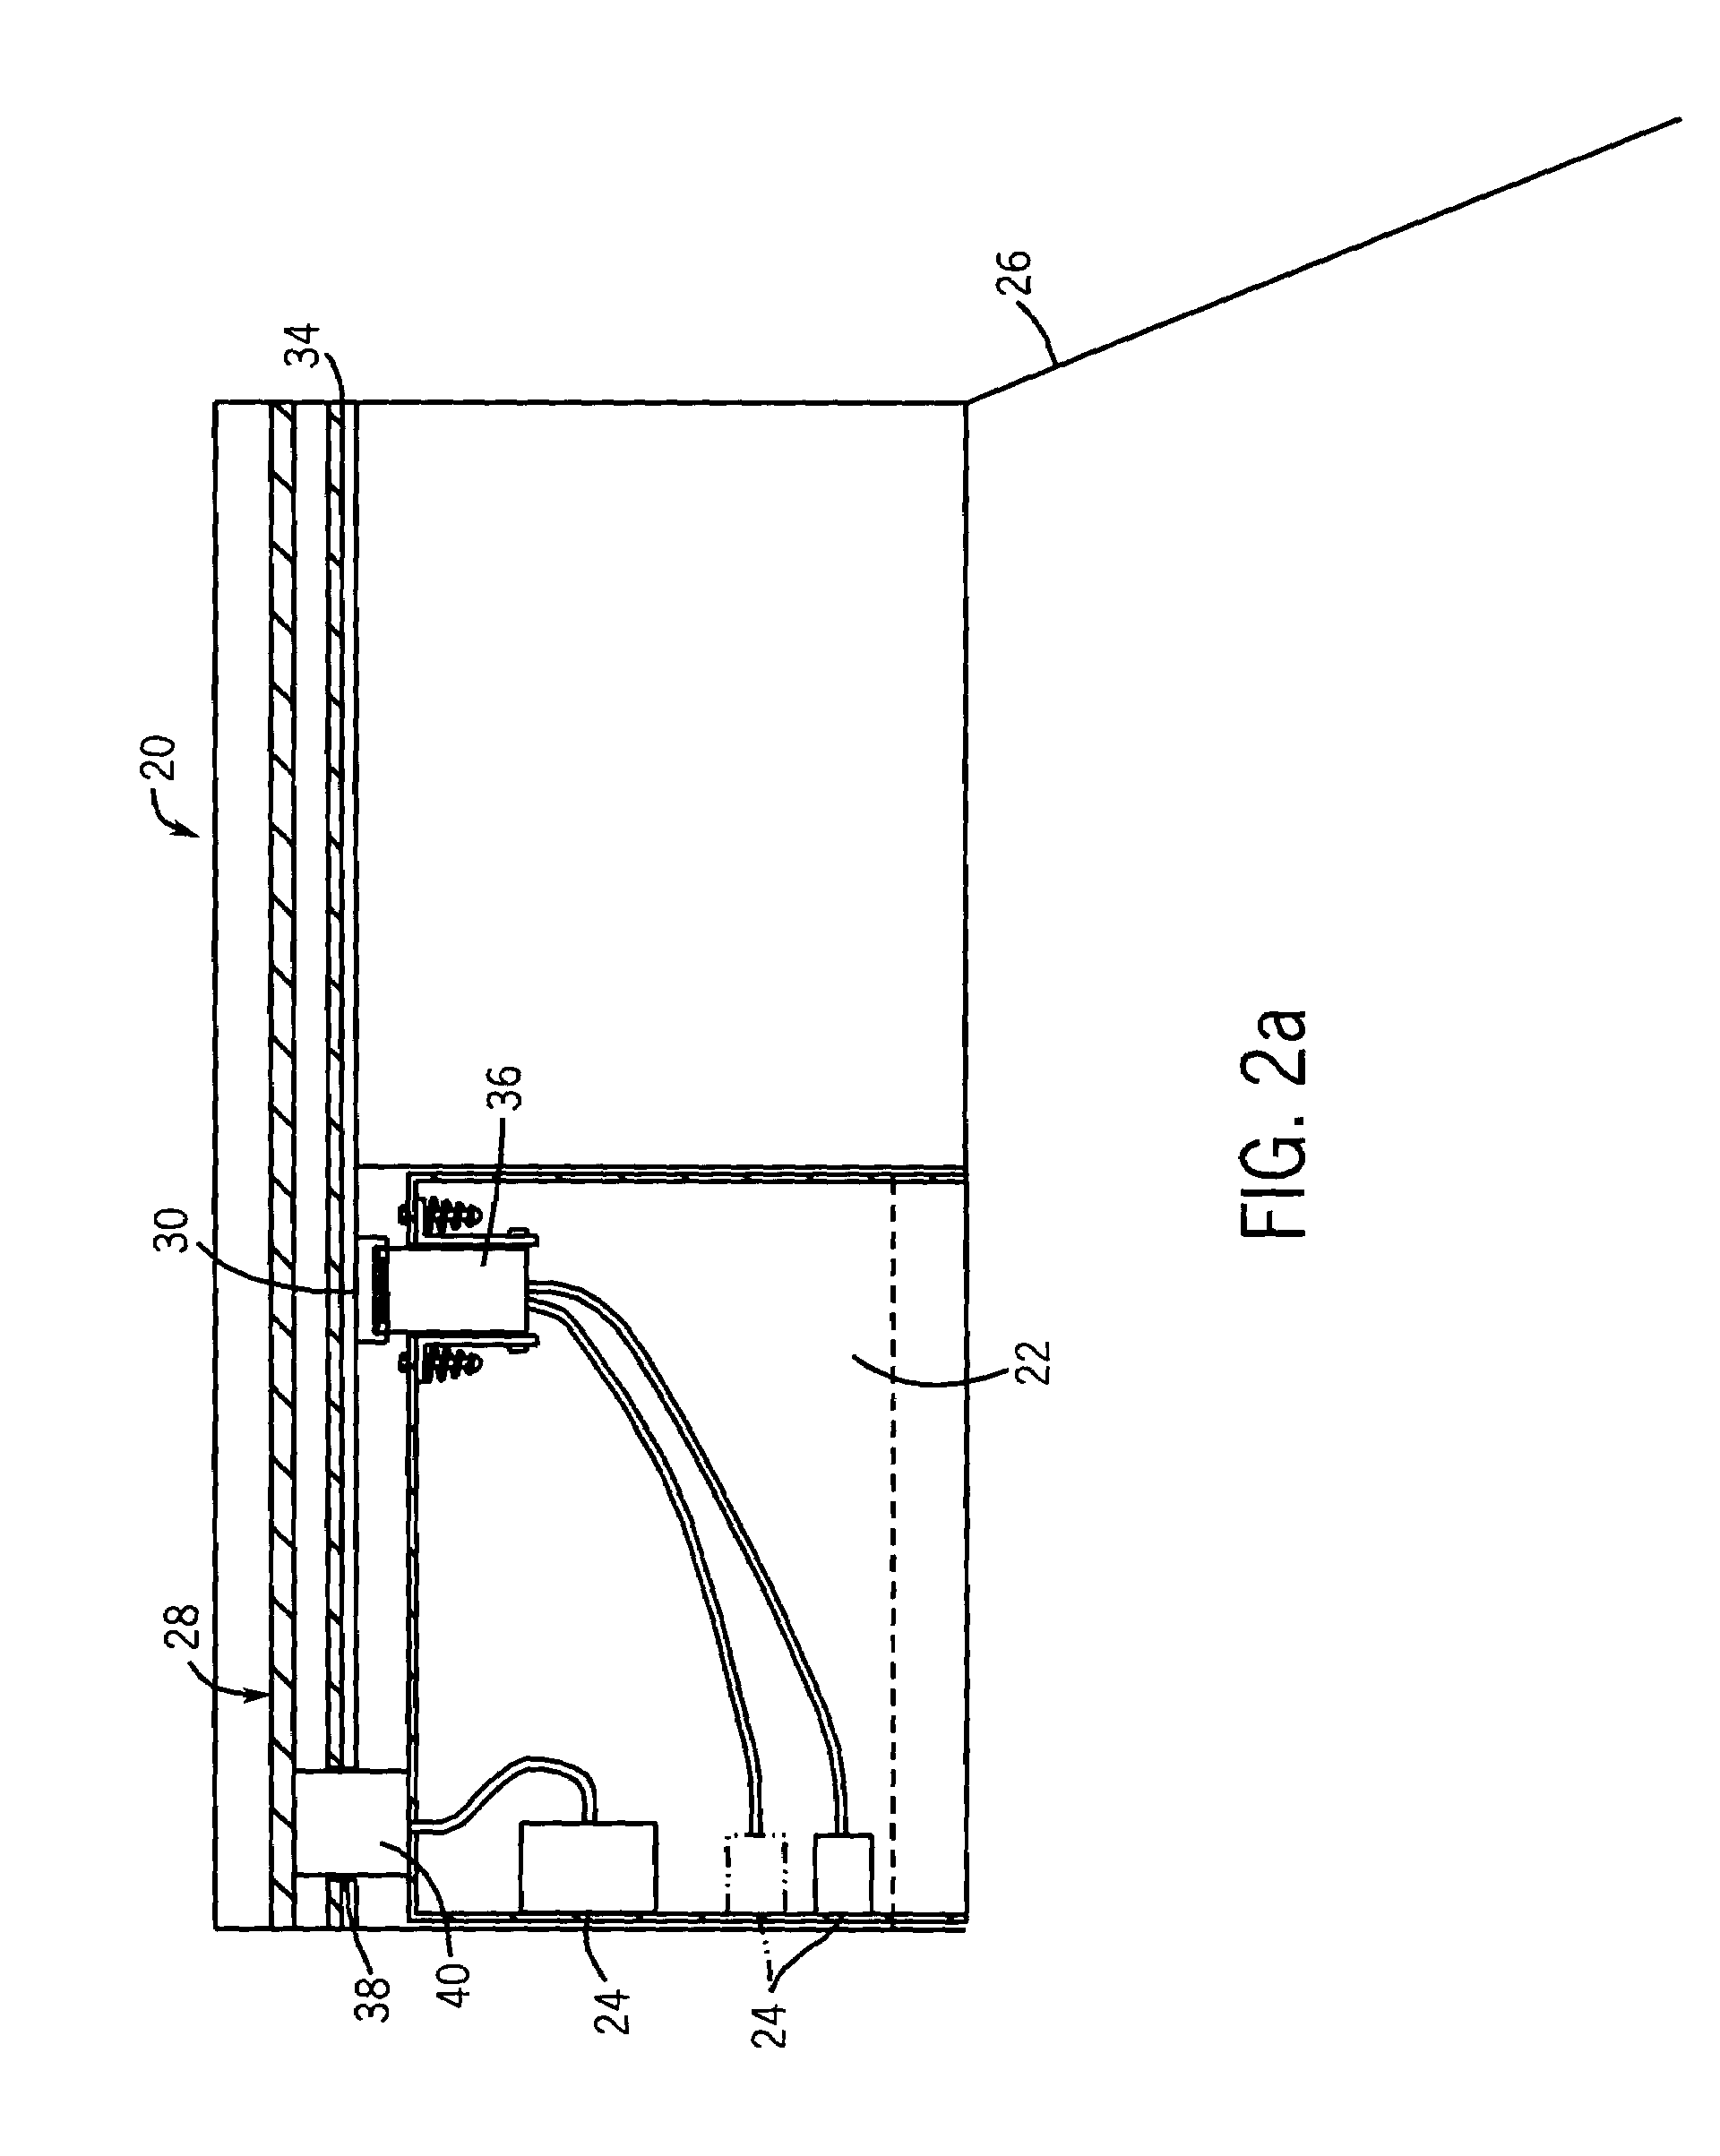 Rail system for distributing power and data signals